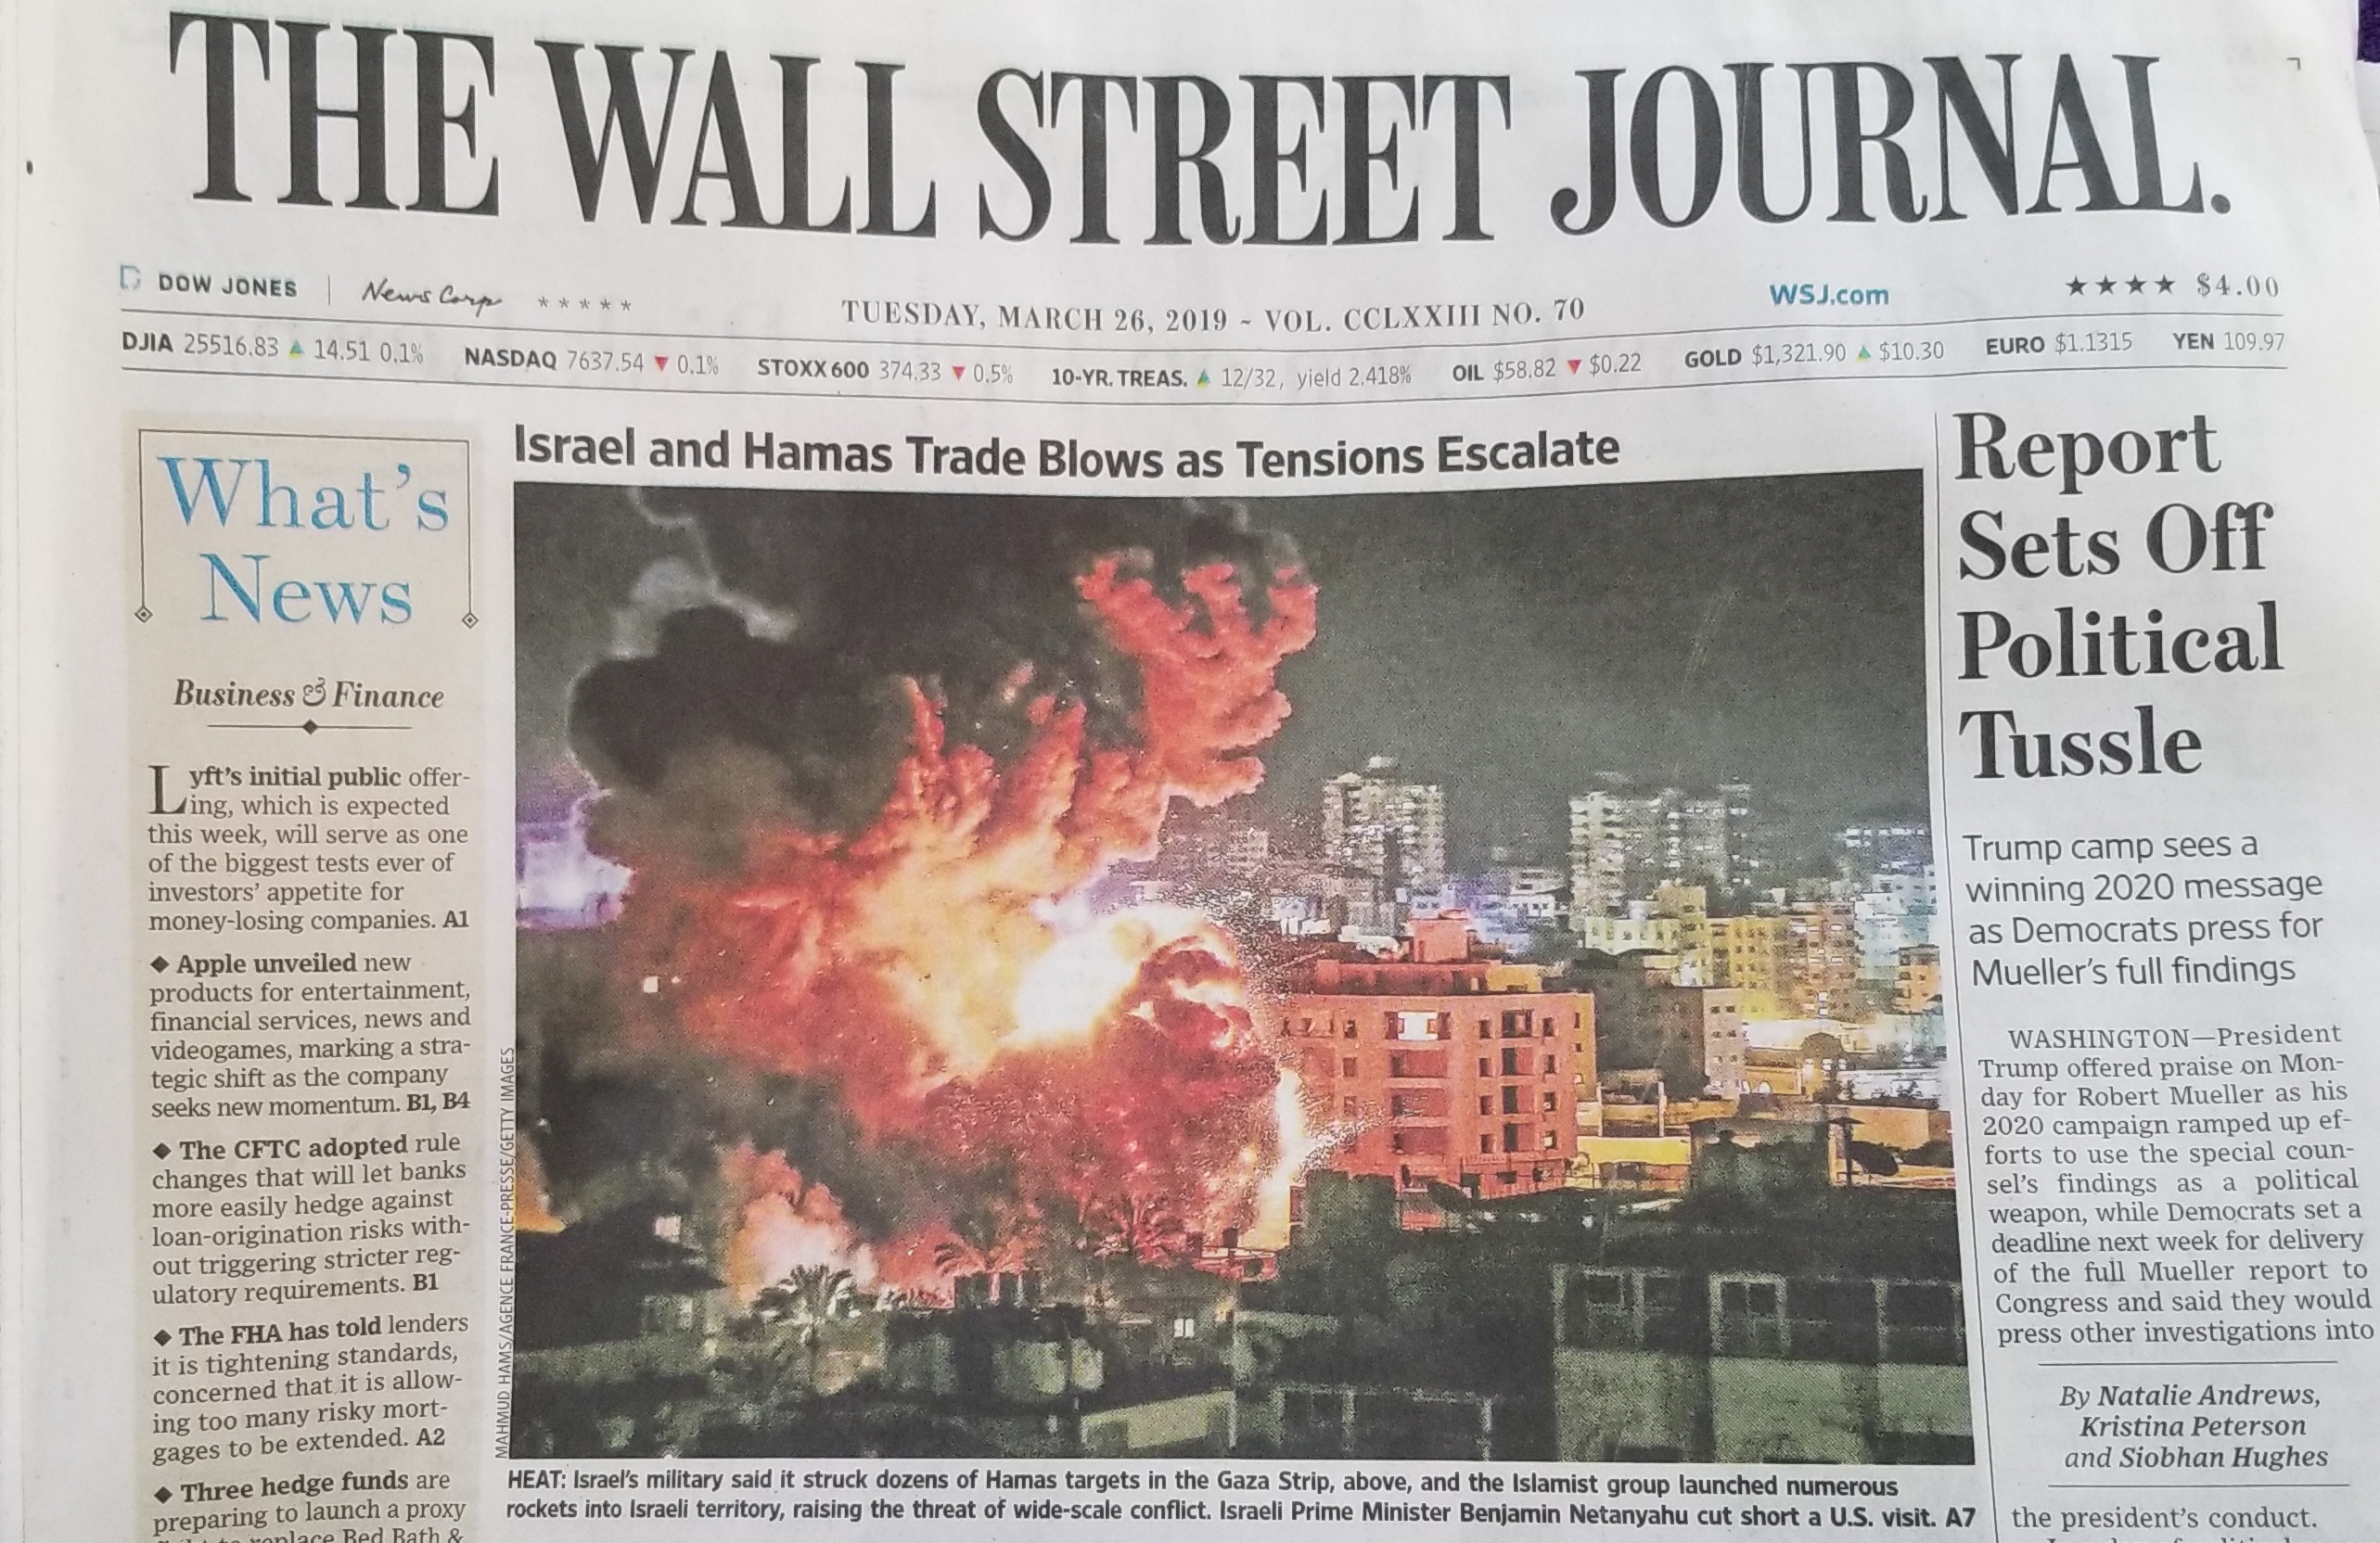 Wall Street Journal Promotes False Moral Equivalency on Front Page | CAMERA